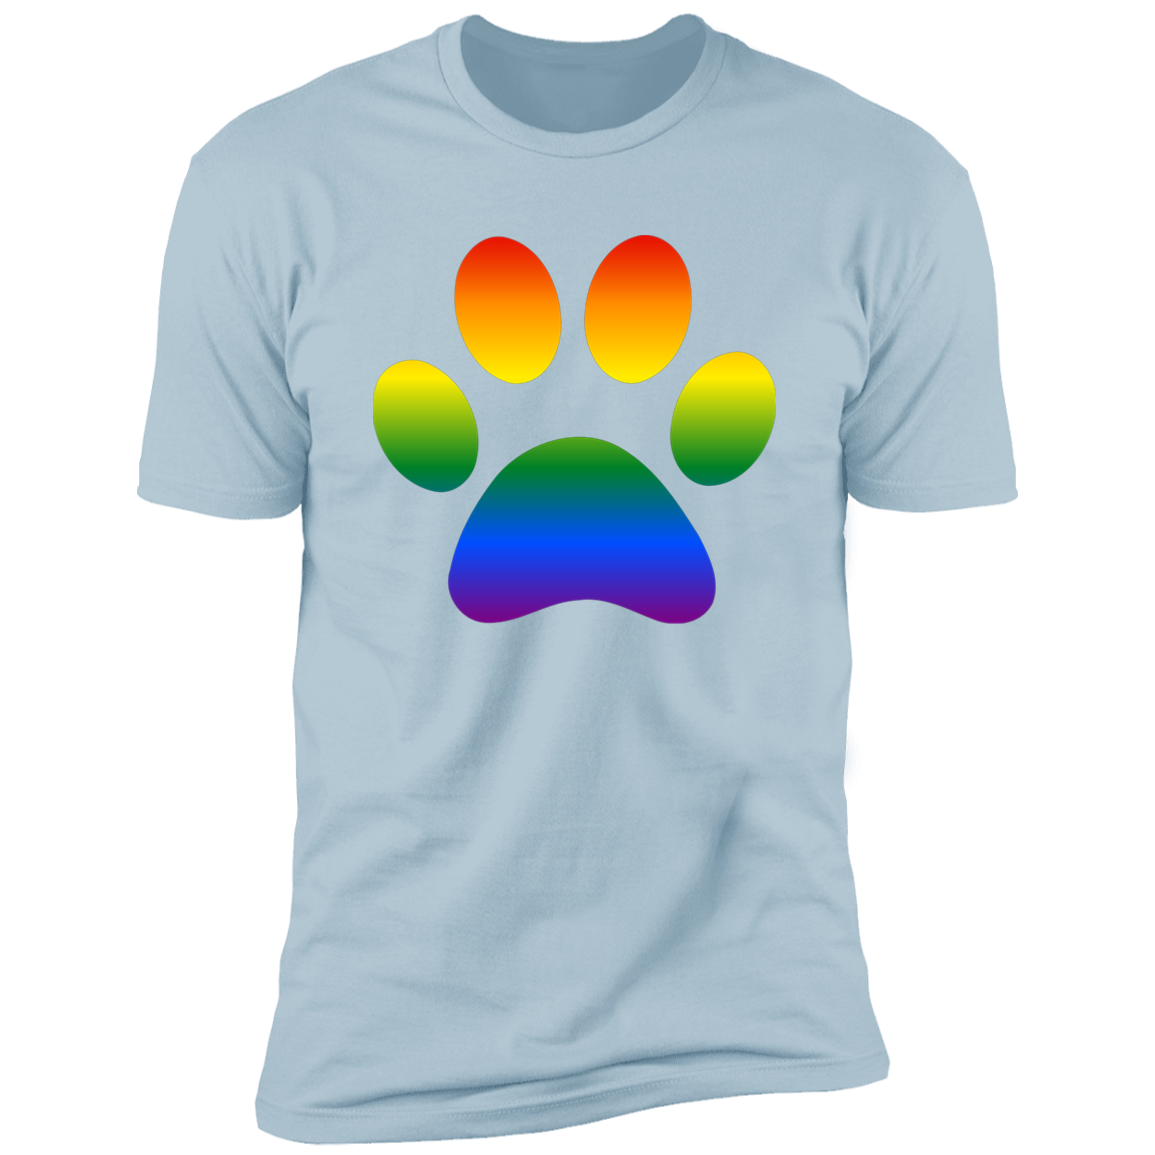 Dog paw Pride, Dog Pride shirt for humas, in light blue